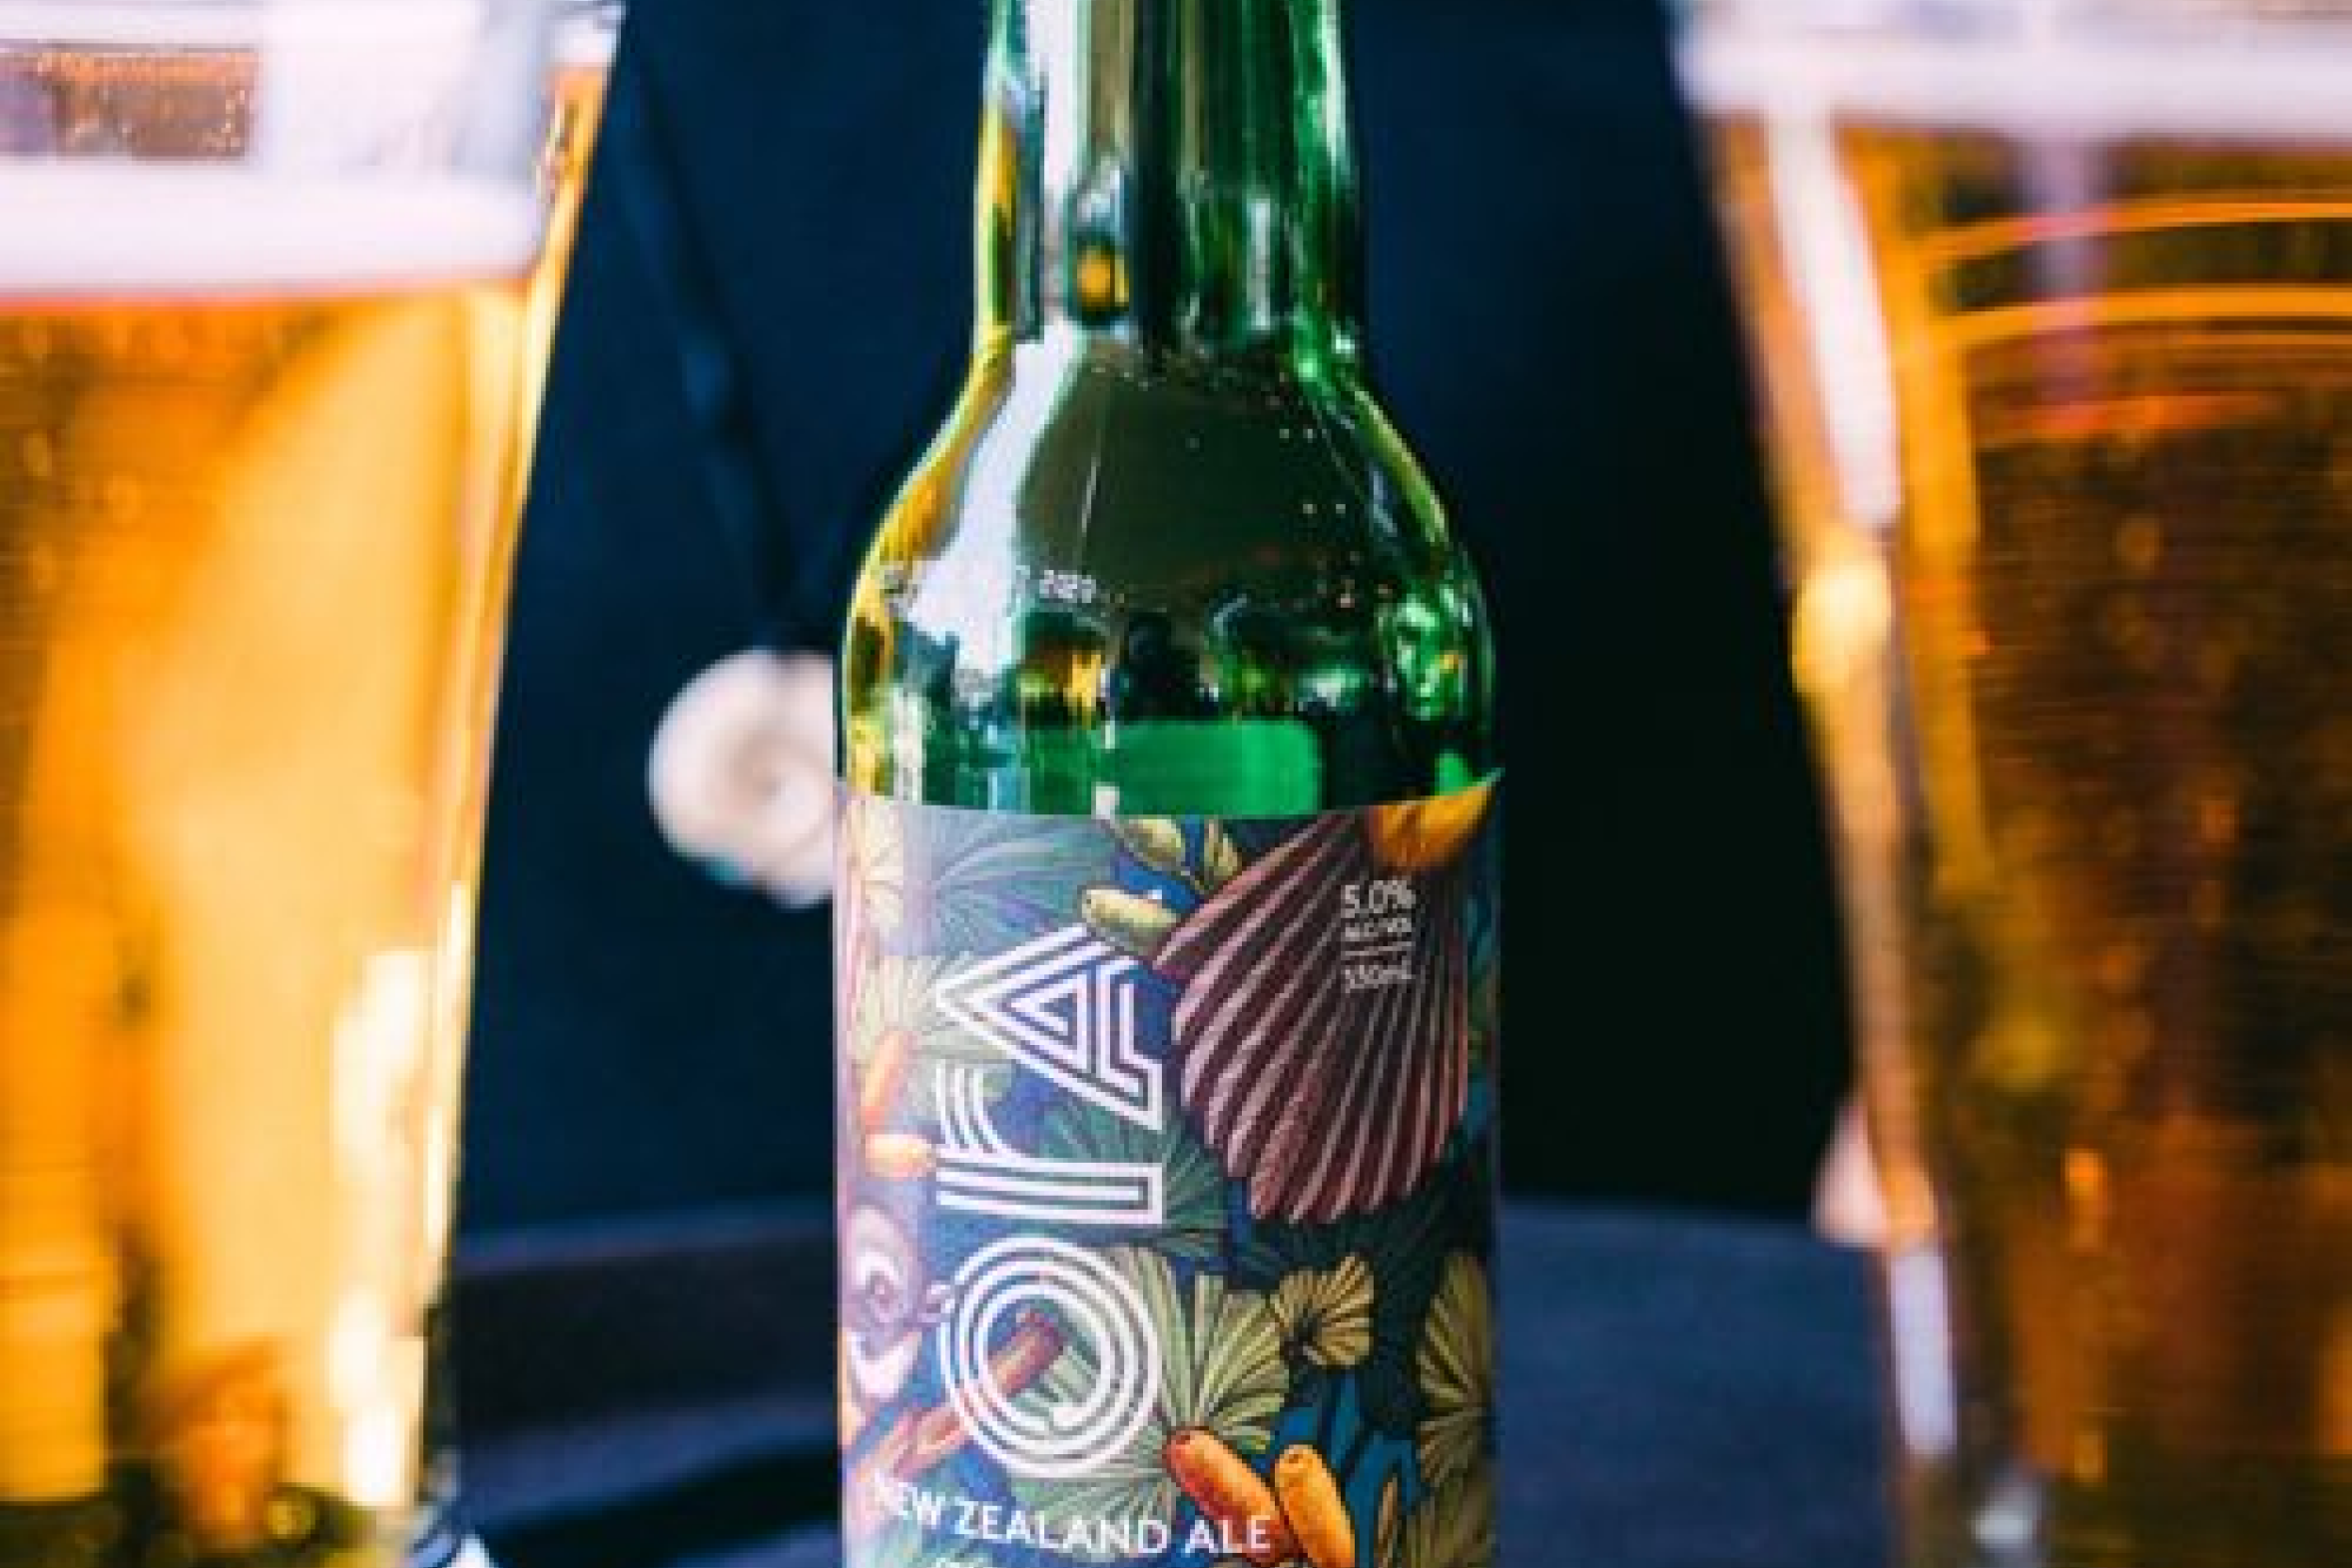 Photo of a beer bottle with a label wrapping